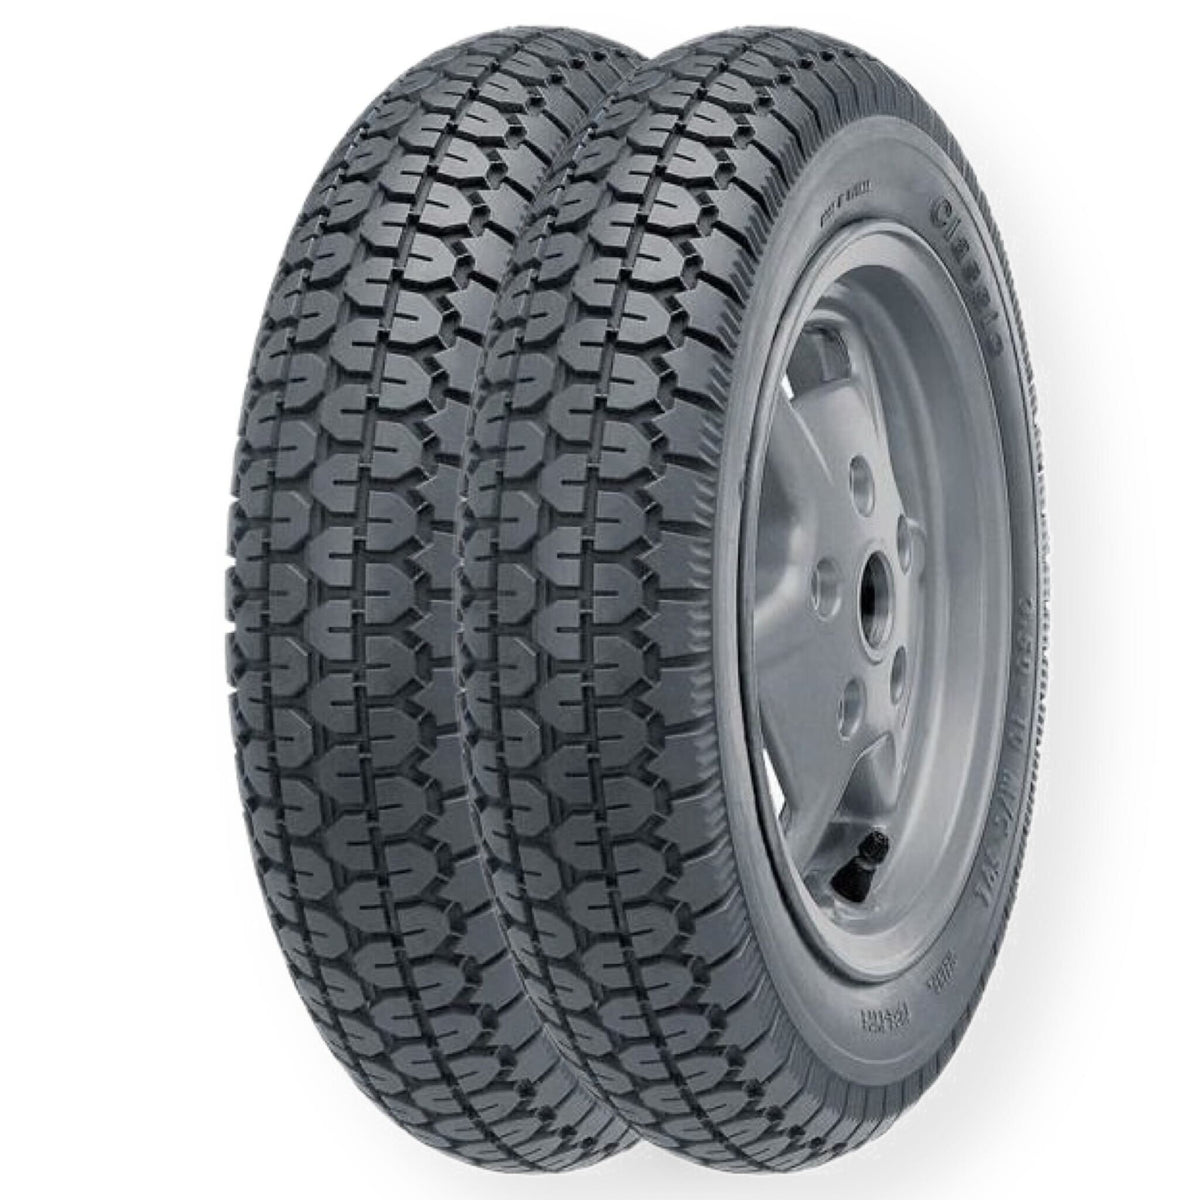 Continental - 350 X 10 - ContiClassic - Tubed Only - 2 Tyre Bundle